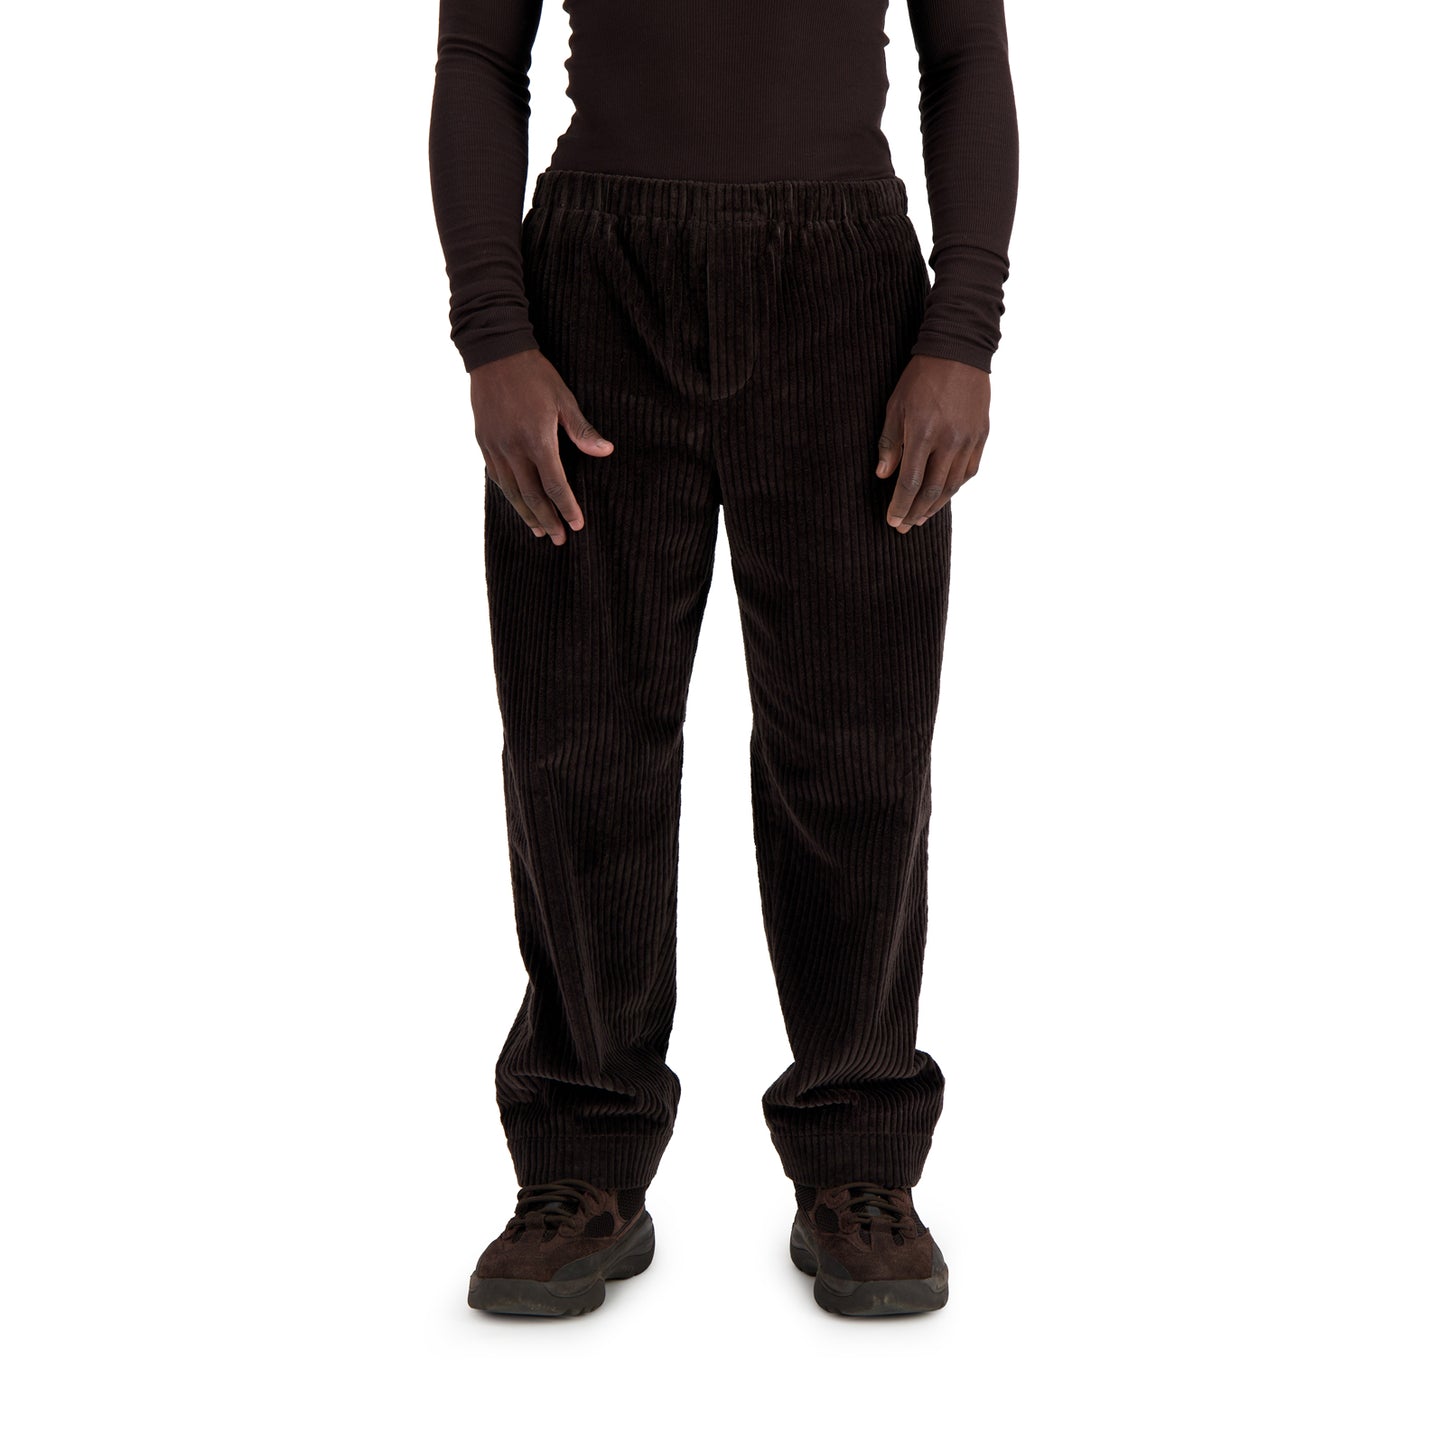 Ed Unlined Exaggerated Cotton Corduroy Drawstring Trousers Dark Chocolate Brown